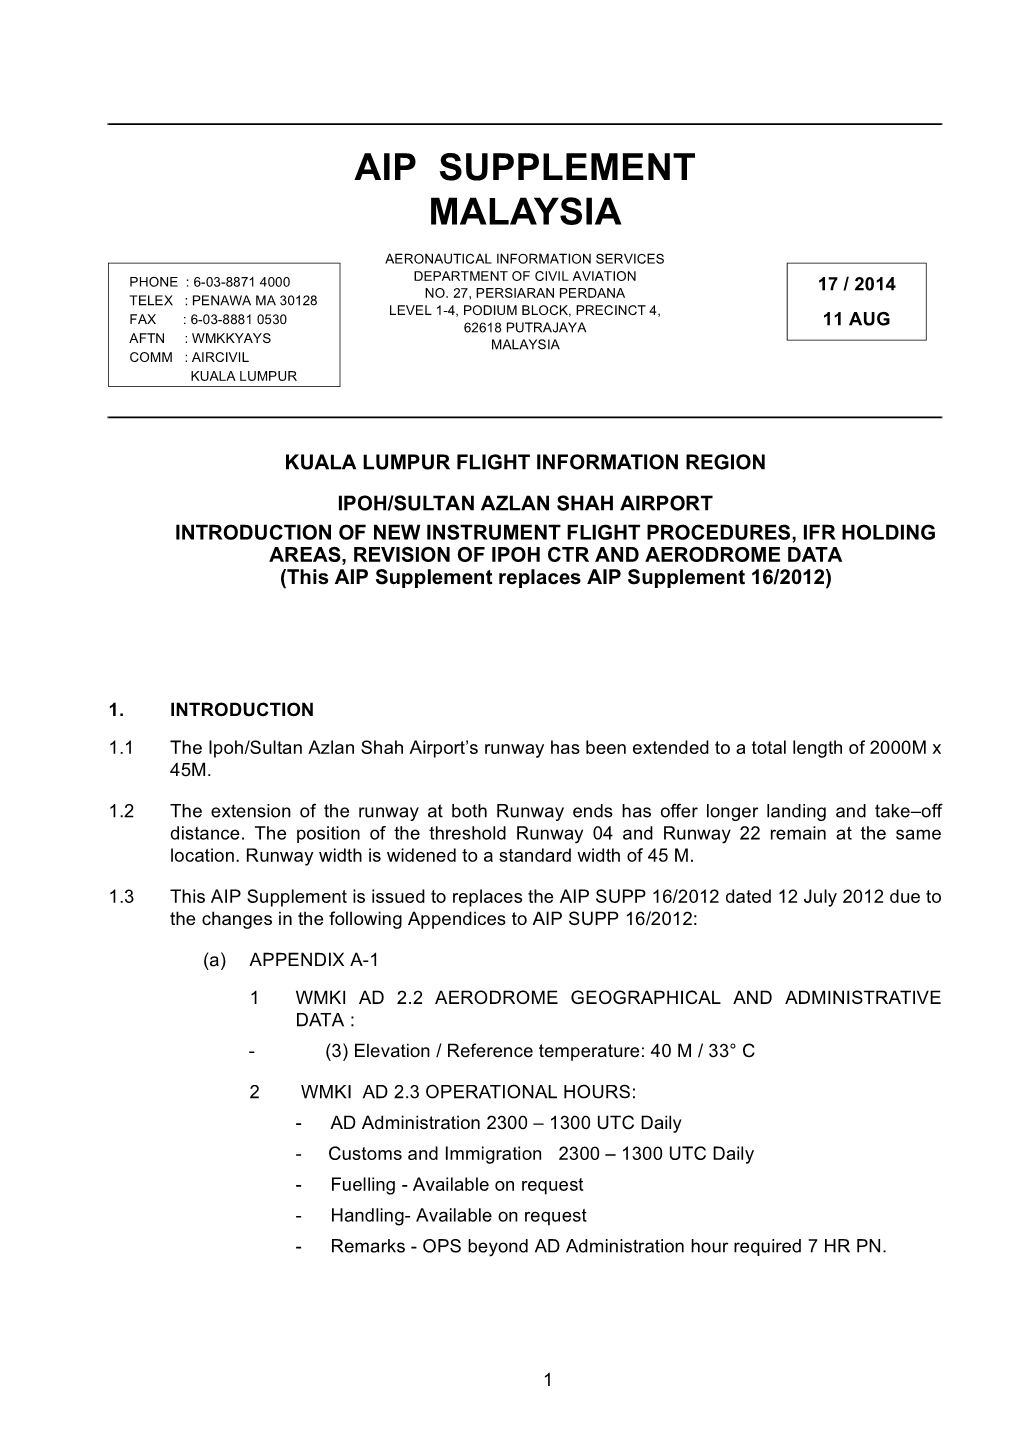 Ipoh / Sultan Azlan Shah Airport in AIP Malaysia Are Superseded and Withdrawn